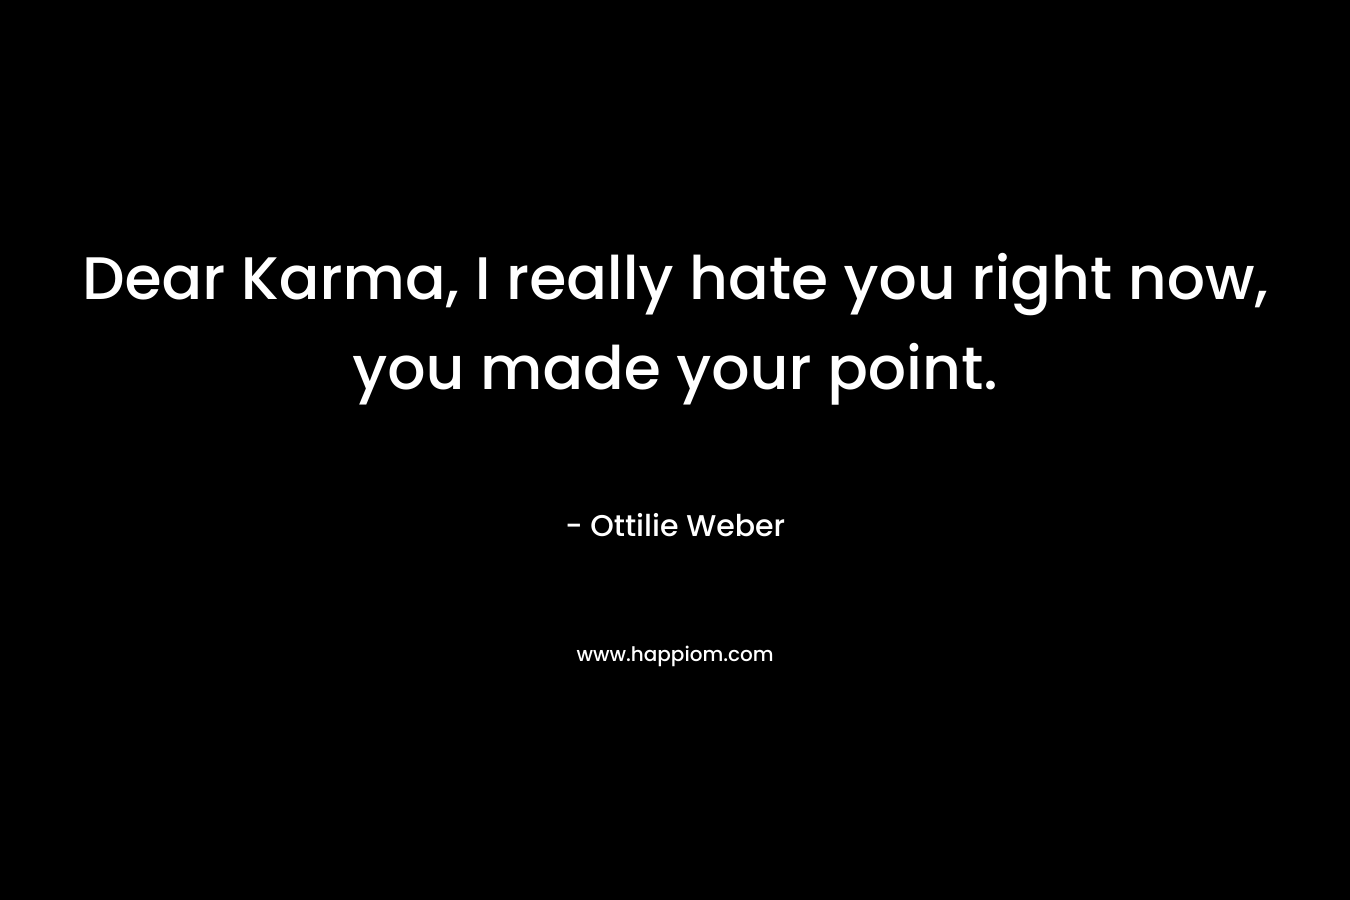 Dear Karma, I really hate you right now, you made your point. – Ottilie Weber